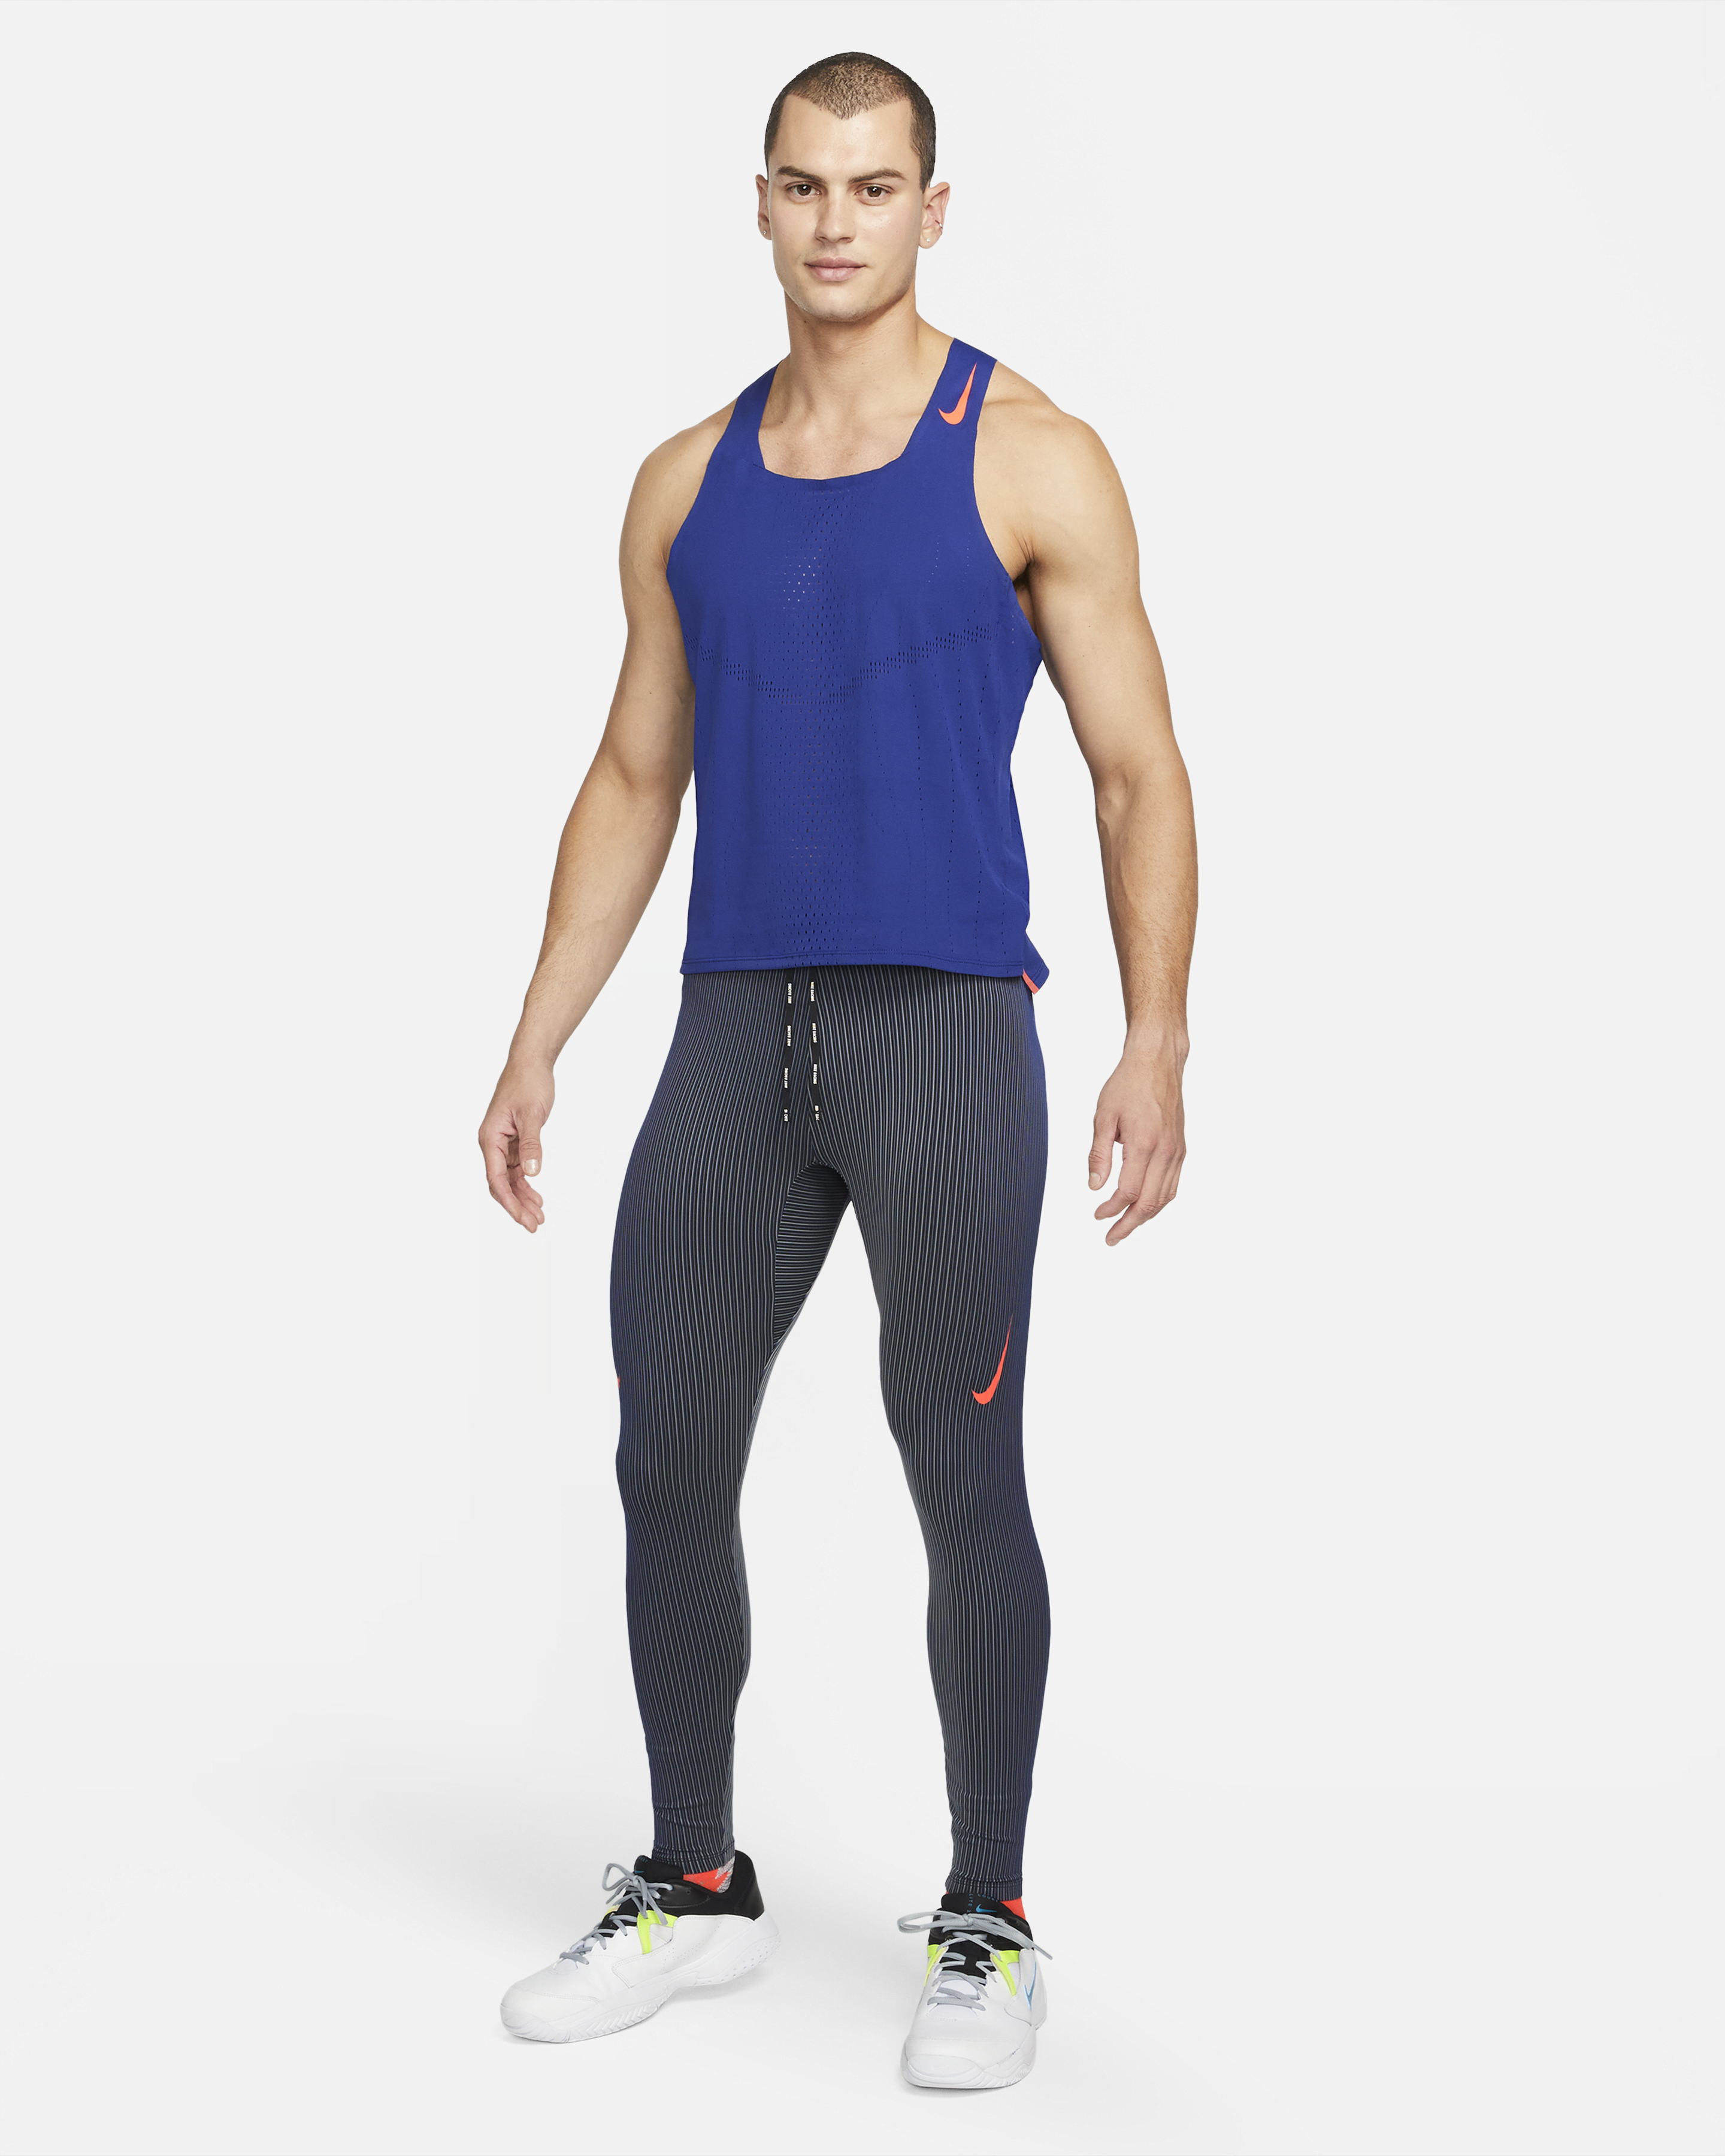 Best Mens Leggings For Cold Weather